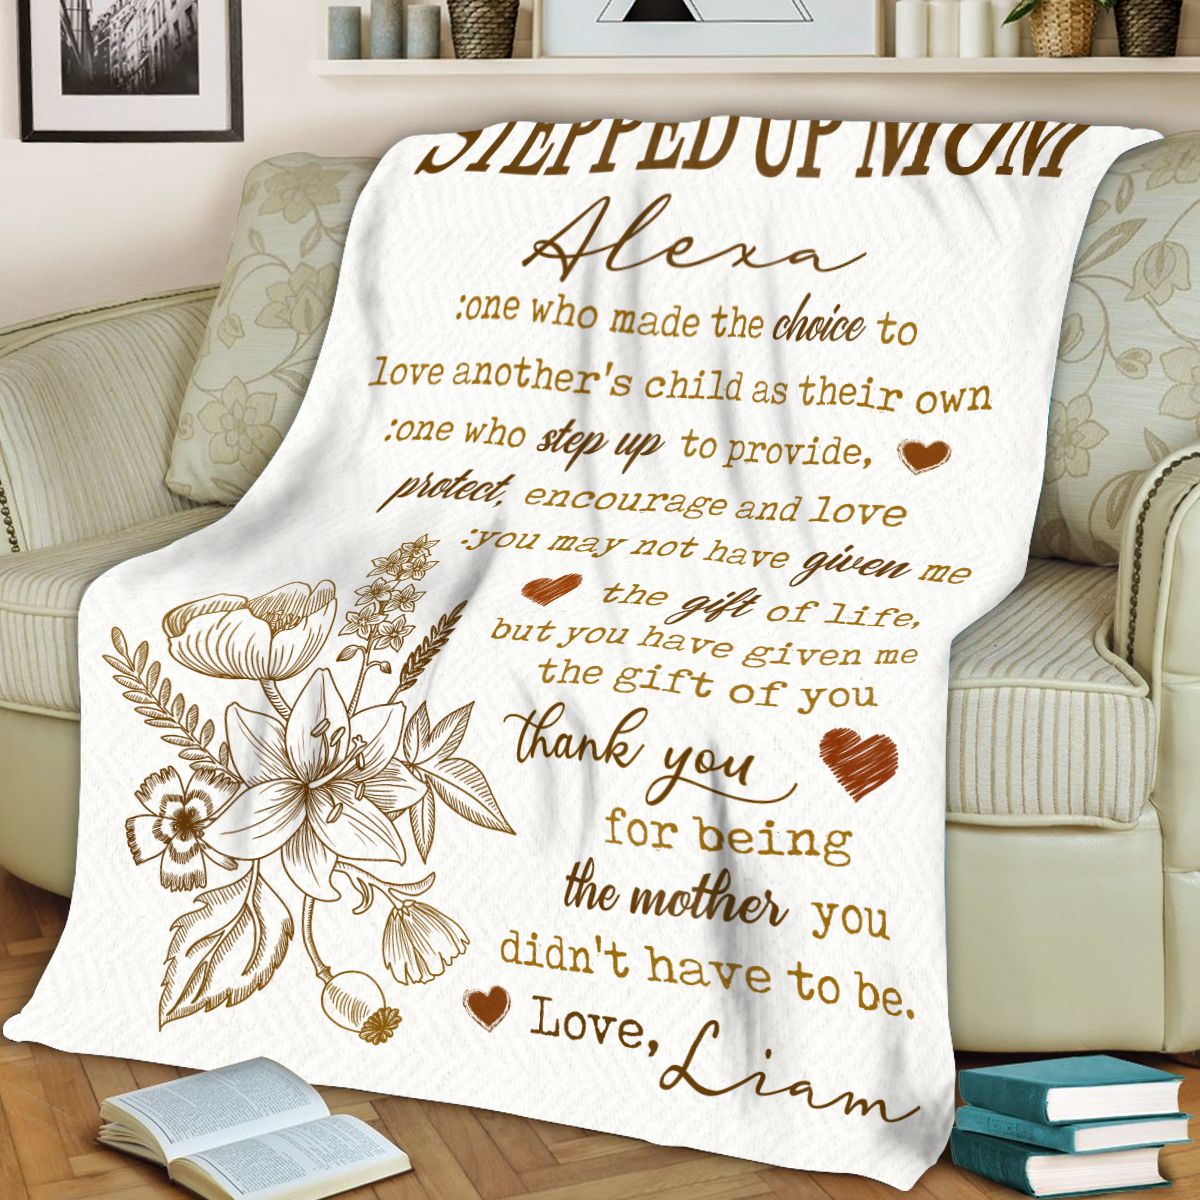 https://images.ohcanvas.com/ohcanvas_com/2023/02/20022604/sweet-gifts-for-your-stepmom-personalized-fleece-blanket-mothers-day-gift-idea-01.jpg